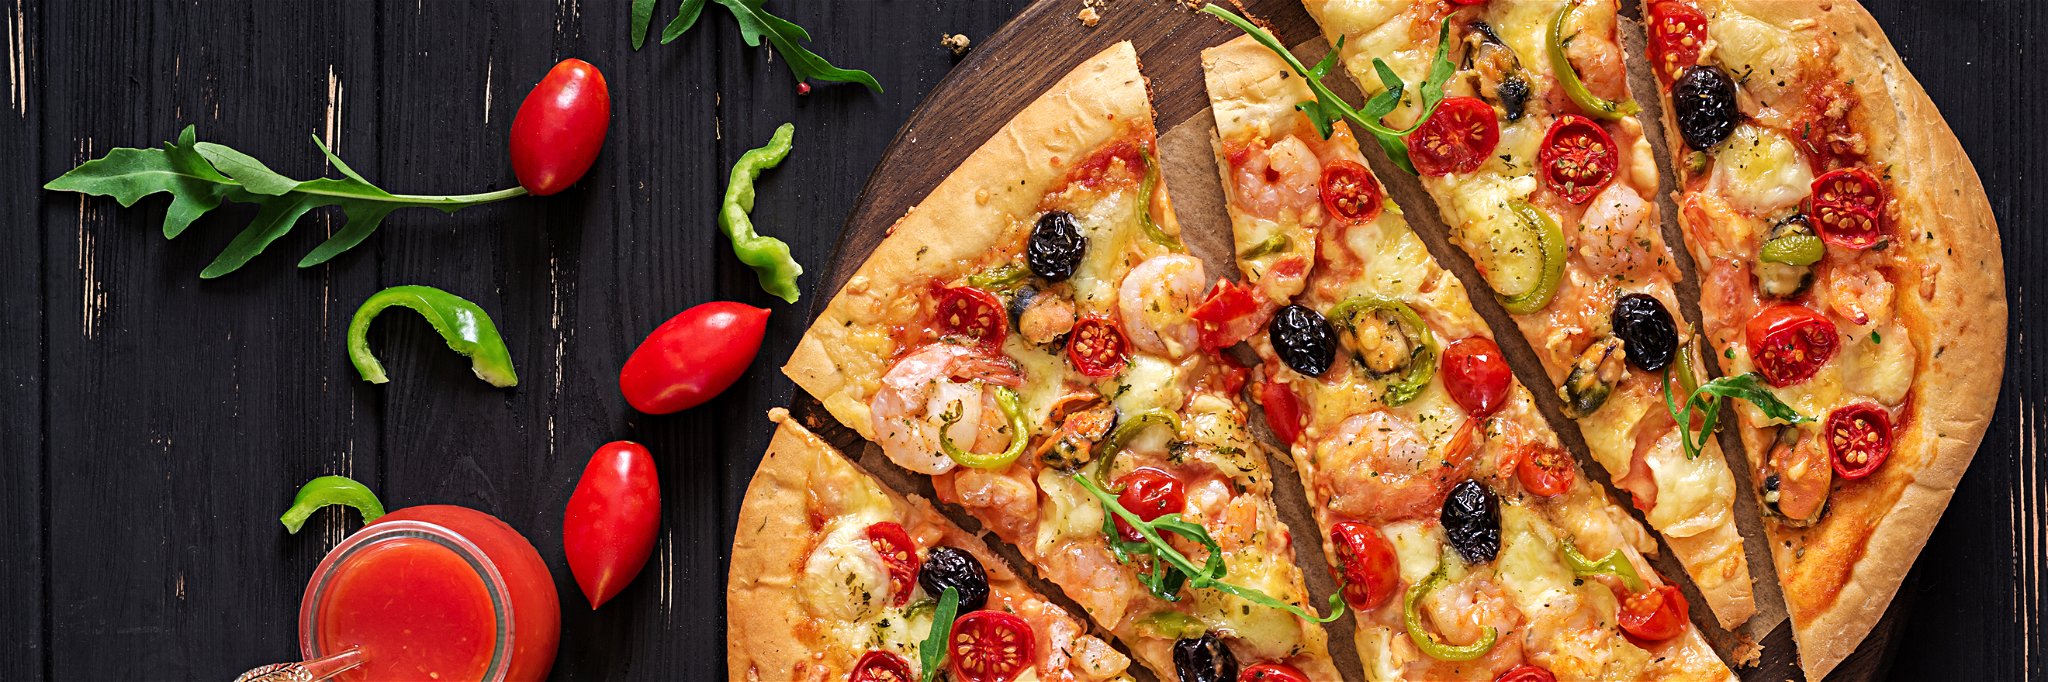 Pizza is one of the world’s most popular foods